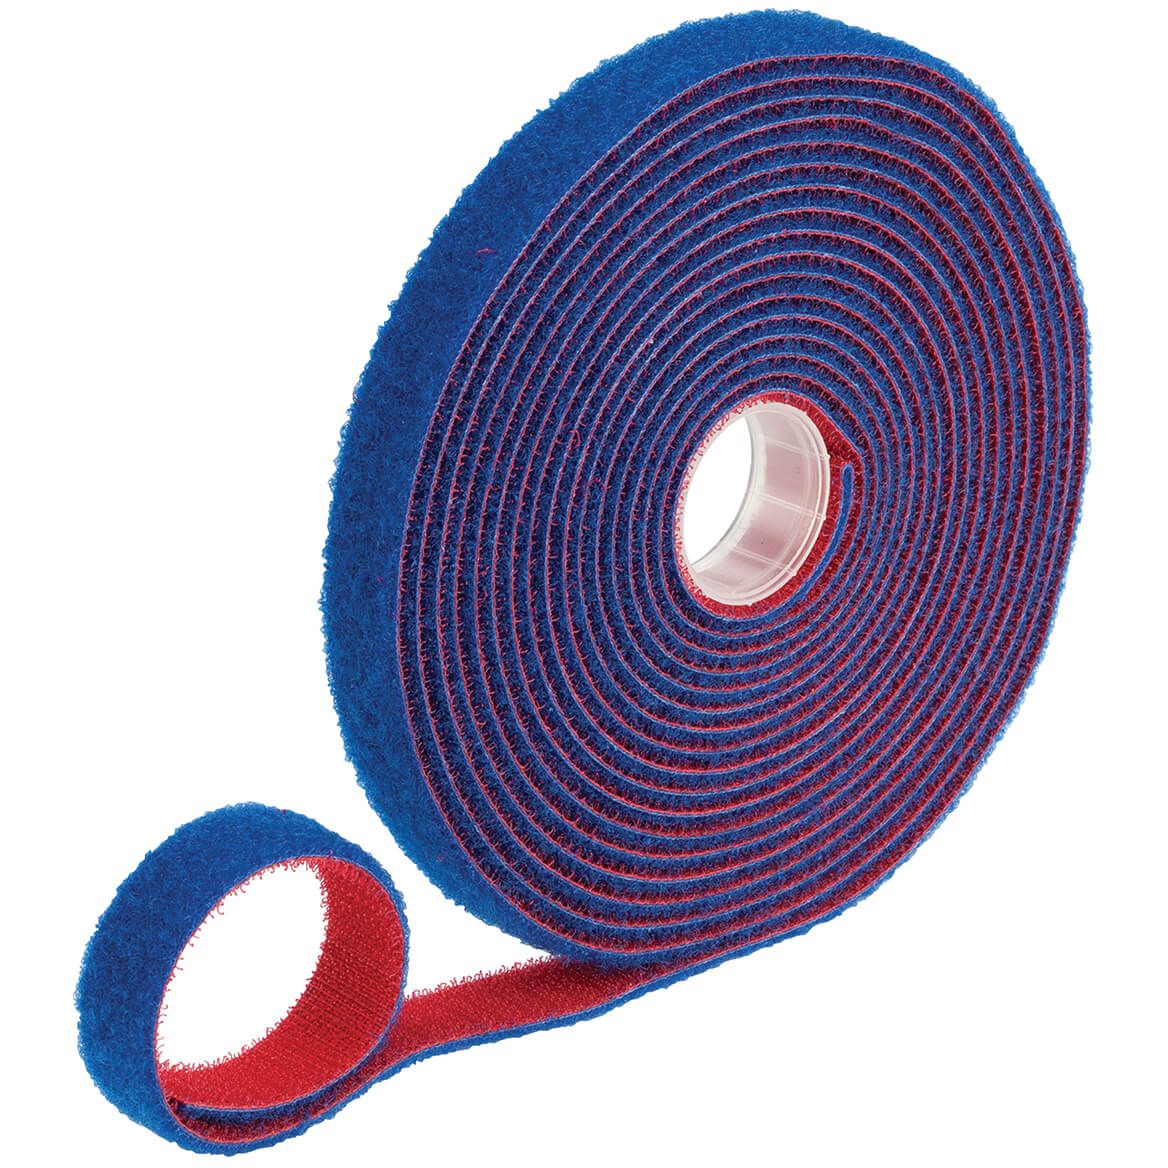 Hook and Loop Fastening Wrap, 16 1/2 ft Roll + '-' + 375257